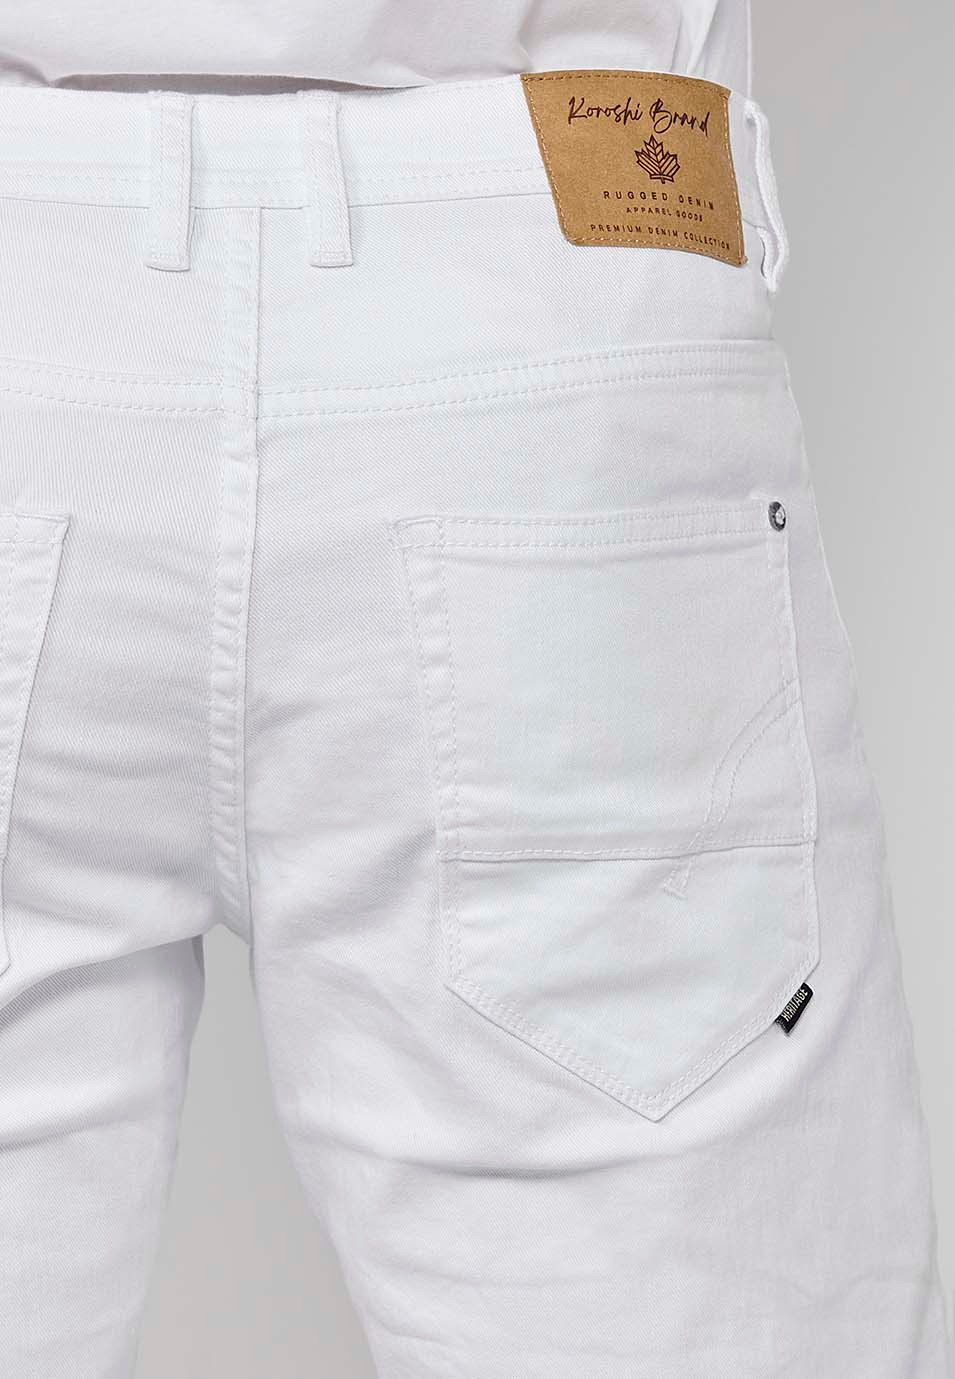 Denim Bermuda shorts with cuffed finish and front zipper and button closure. Five pockets, one match pocket, White for Men 6